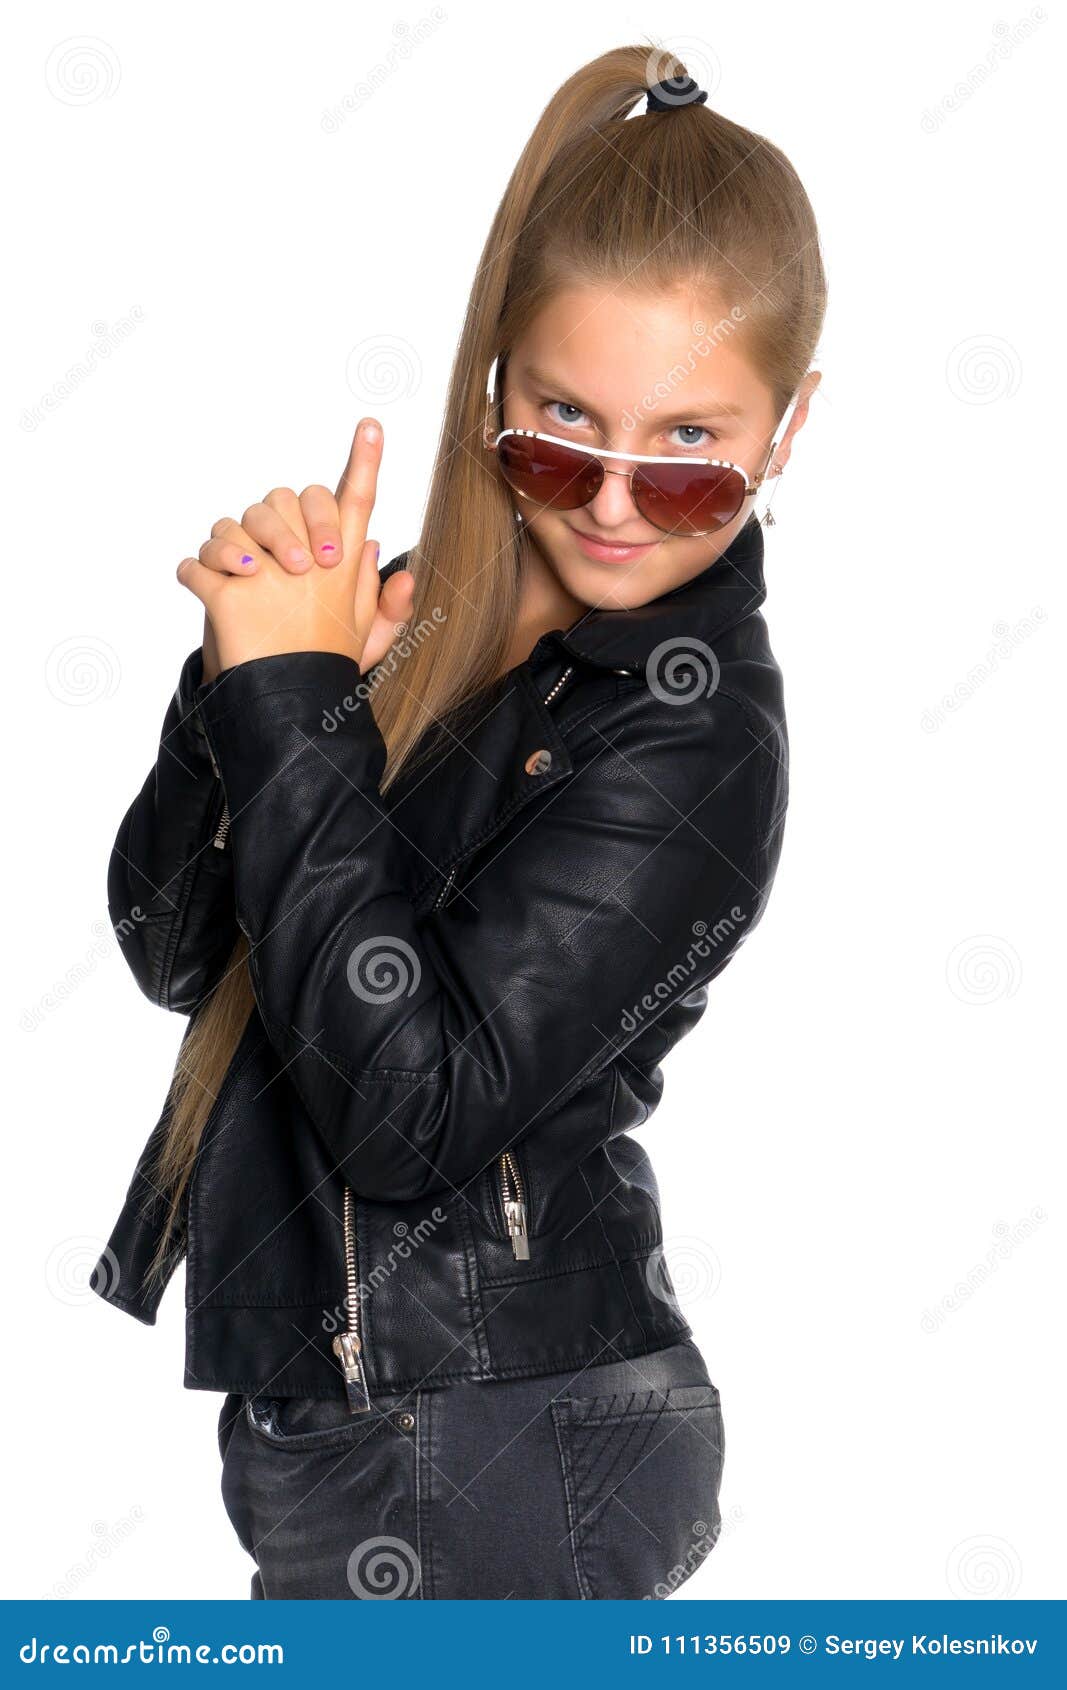 A Teenage Girl in a Leather Jacket and Glasses Stock Image - Image of ...